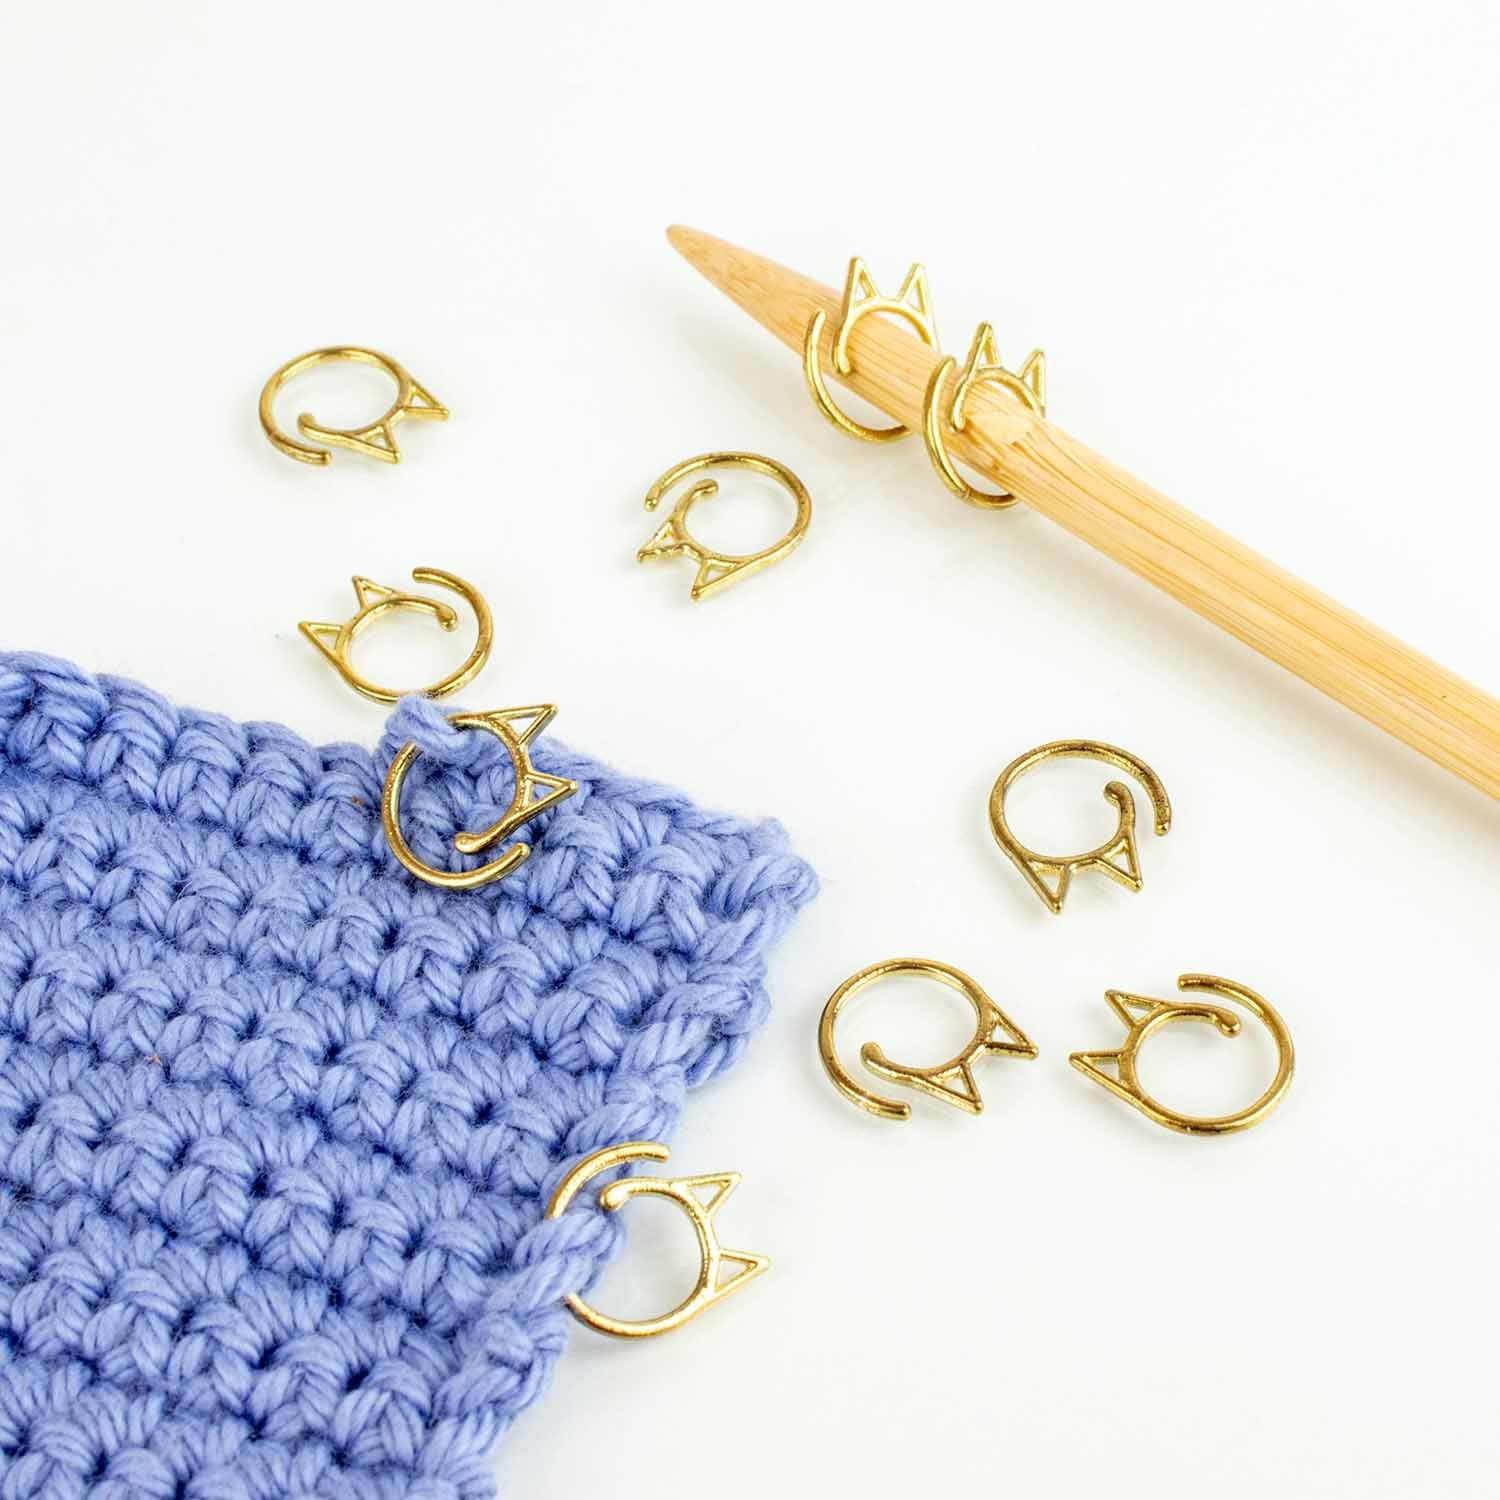 DIY Rainbow Stitch Markers for Knitting